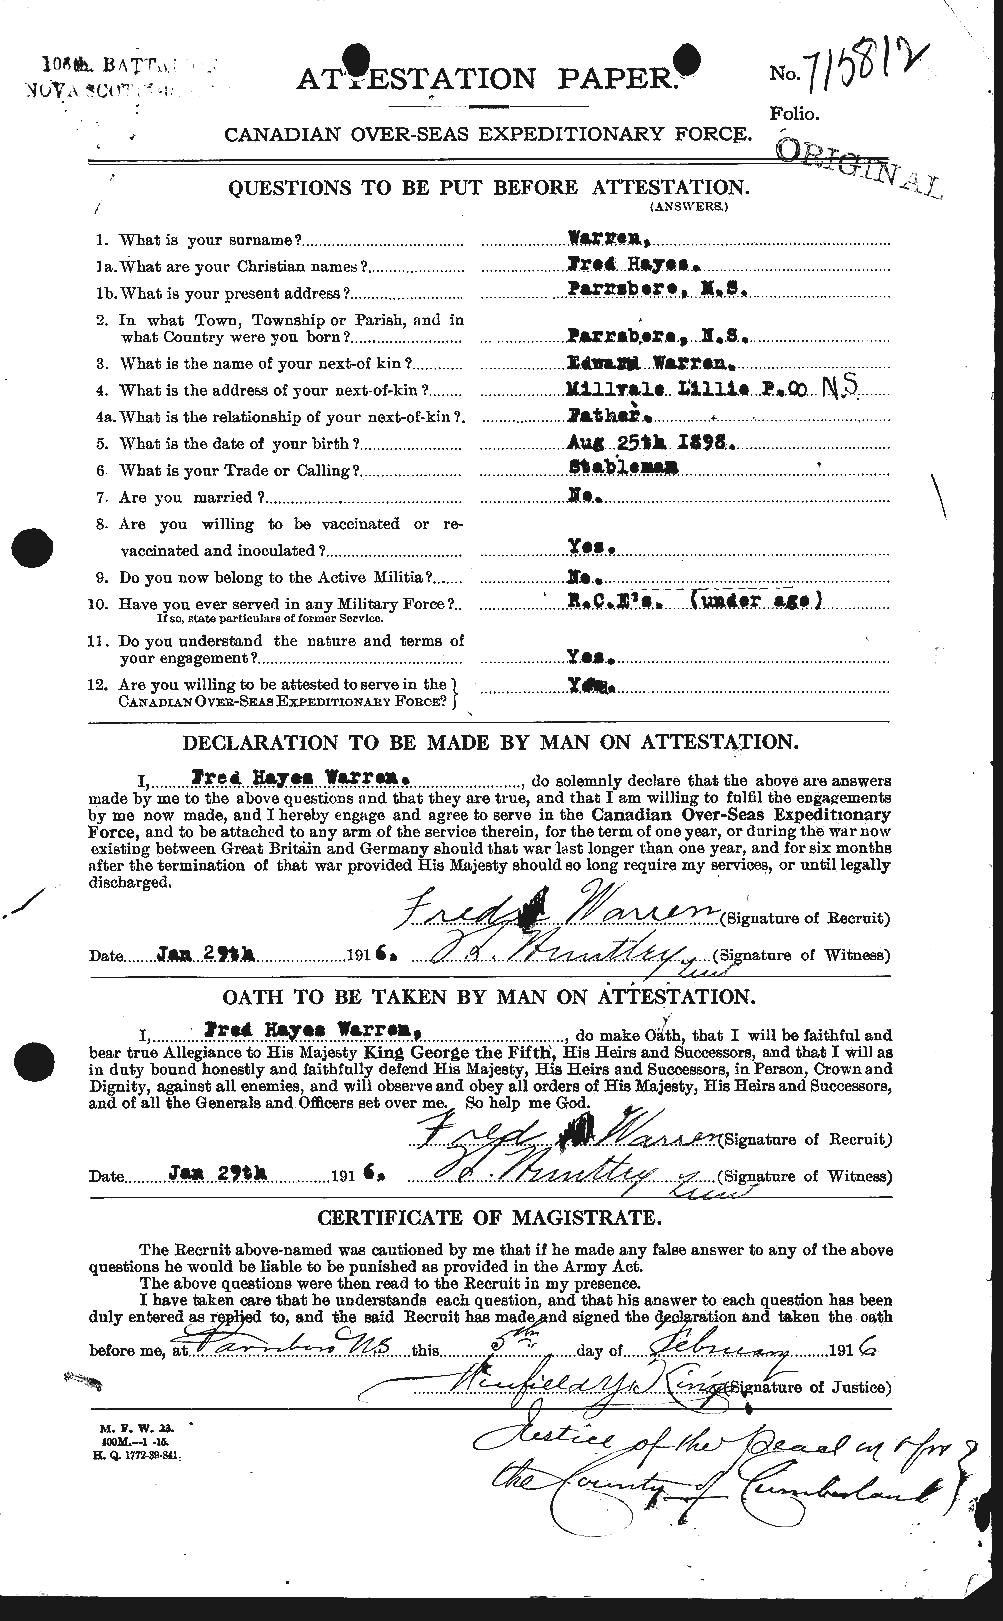 Personnel Records of the First World War - CEF 658439a